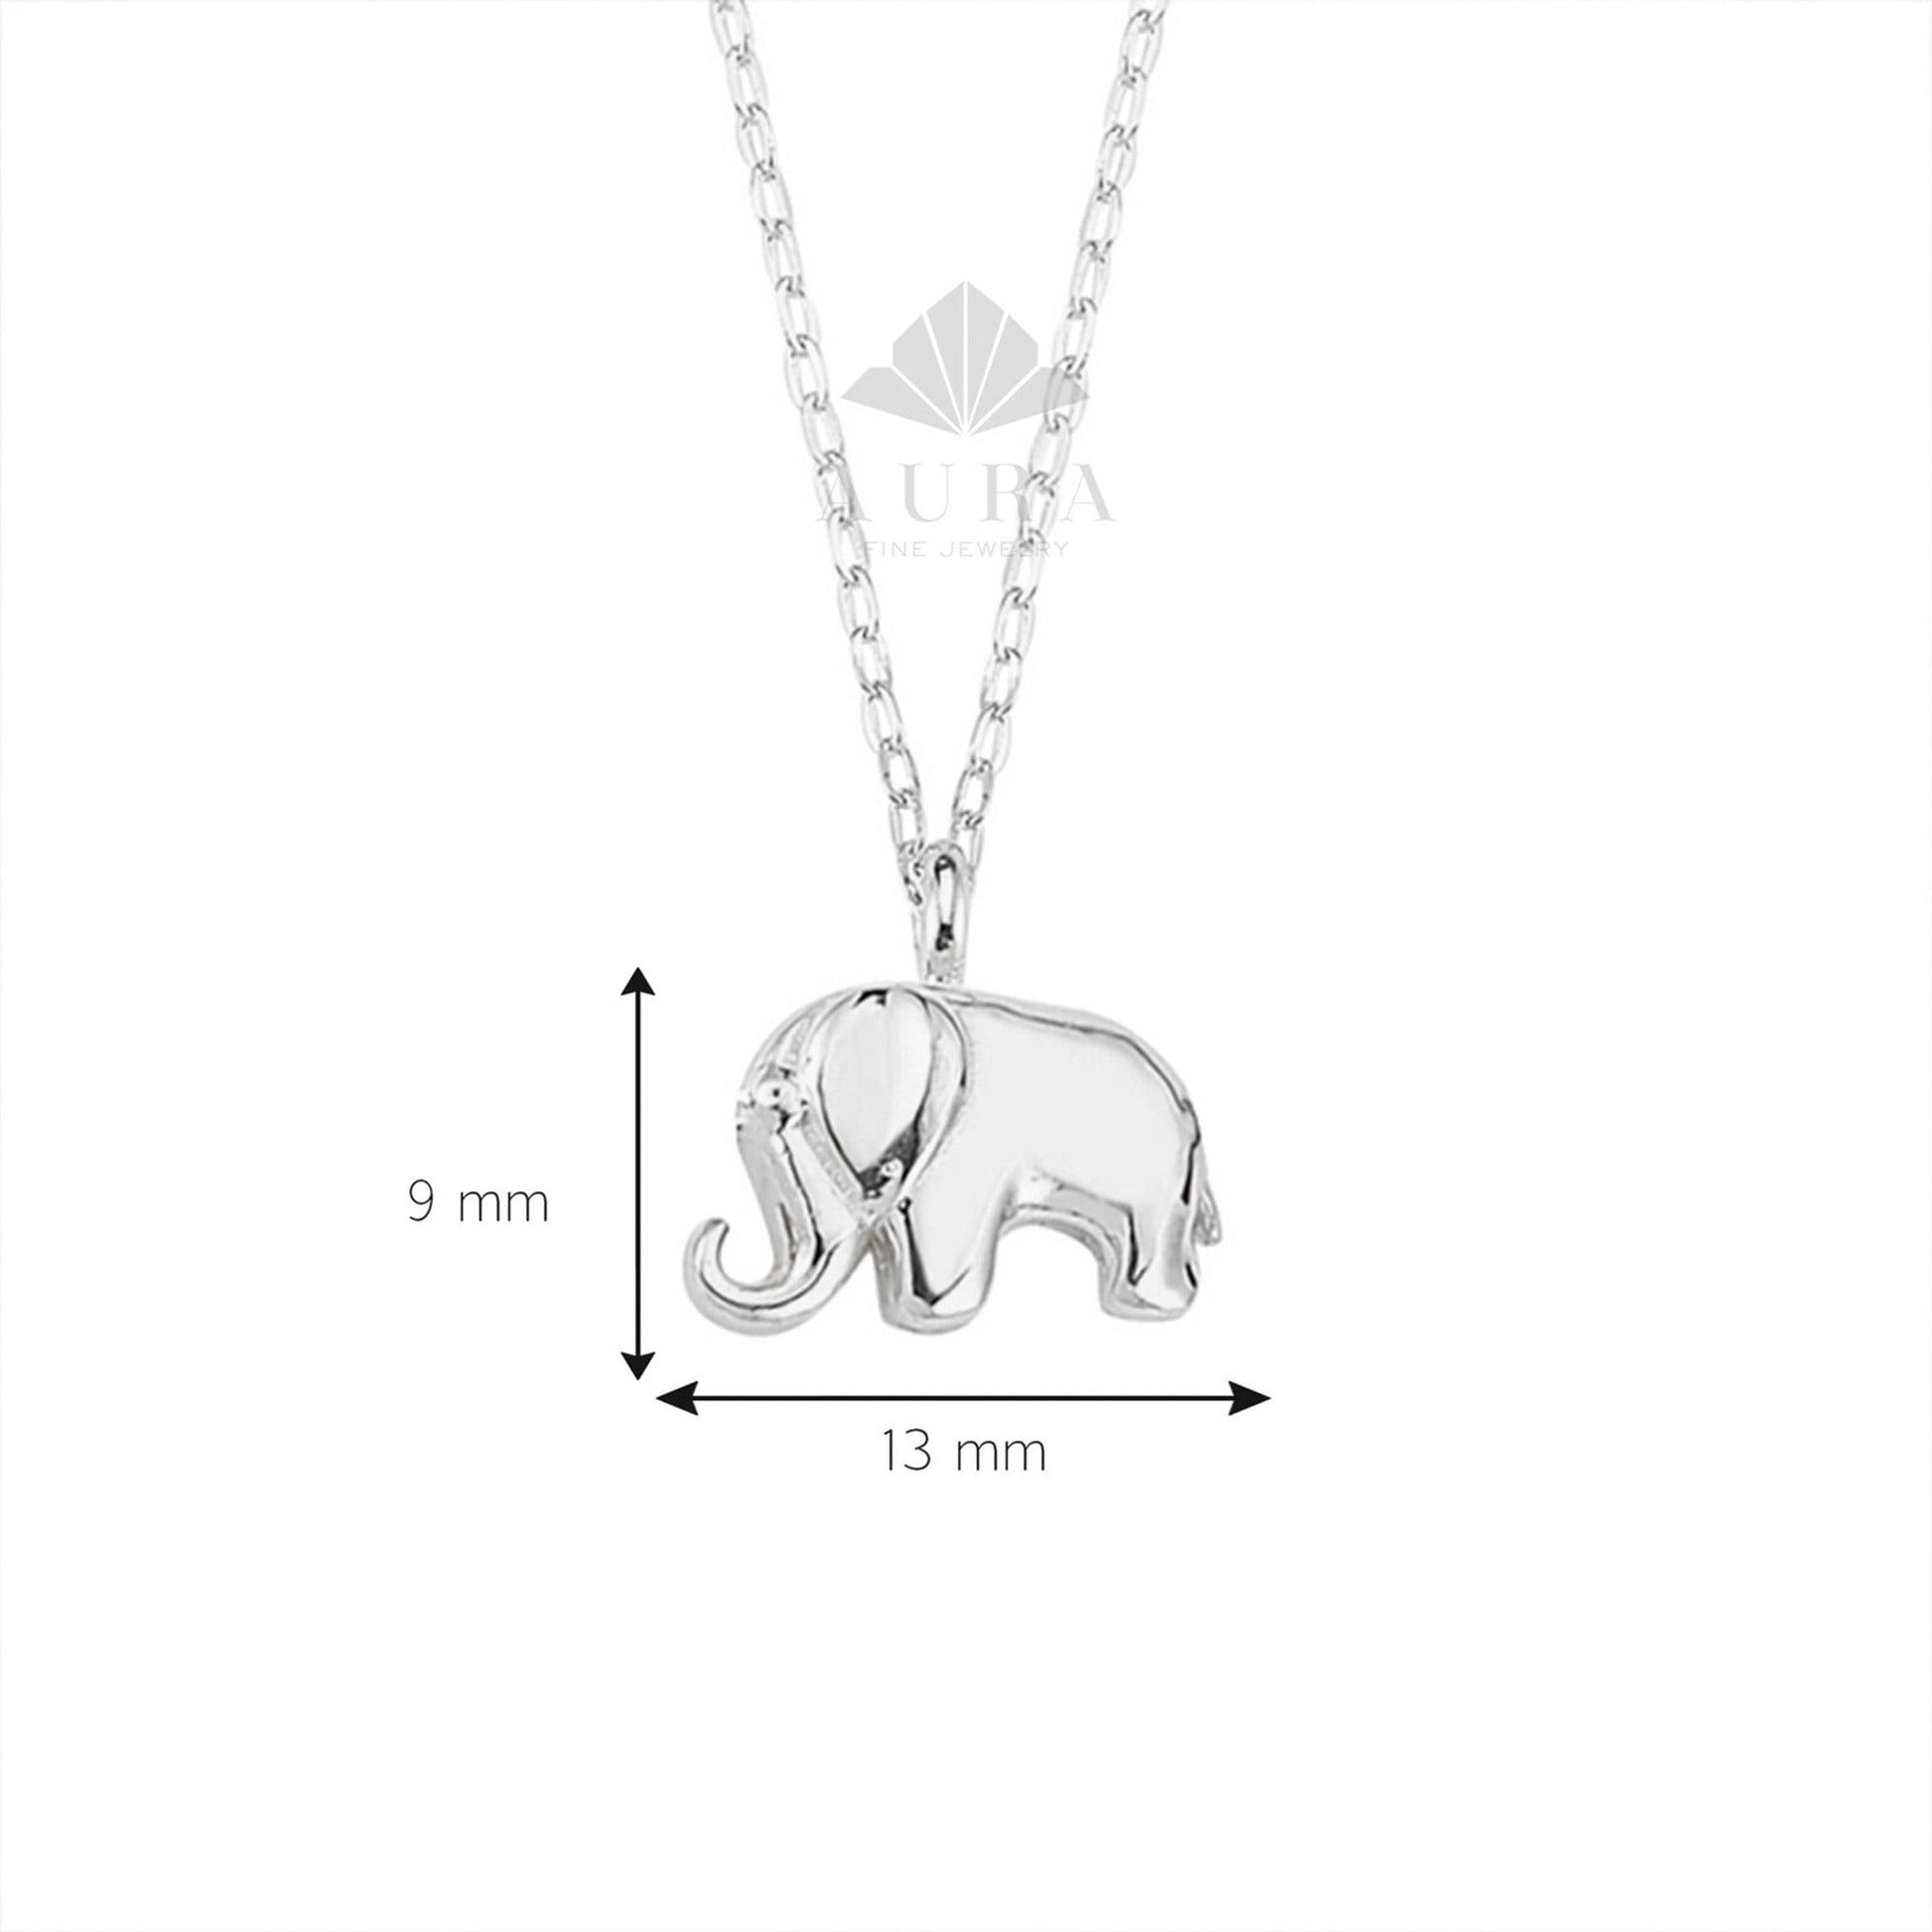 14K Gold Elephant Necklace, Elephant Pendant Necklace, Tiny Elephant Charm, Dainty Gold Chain Choker, Animal Jewelry, Gift For Her